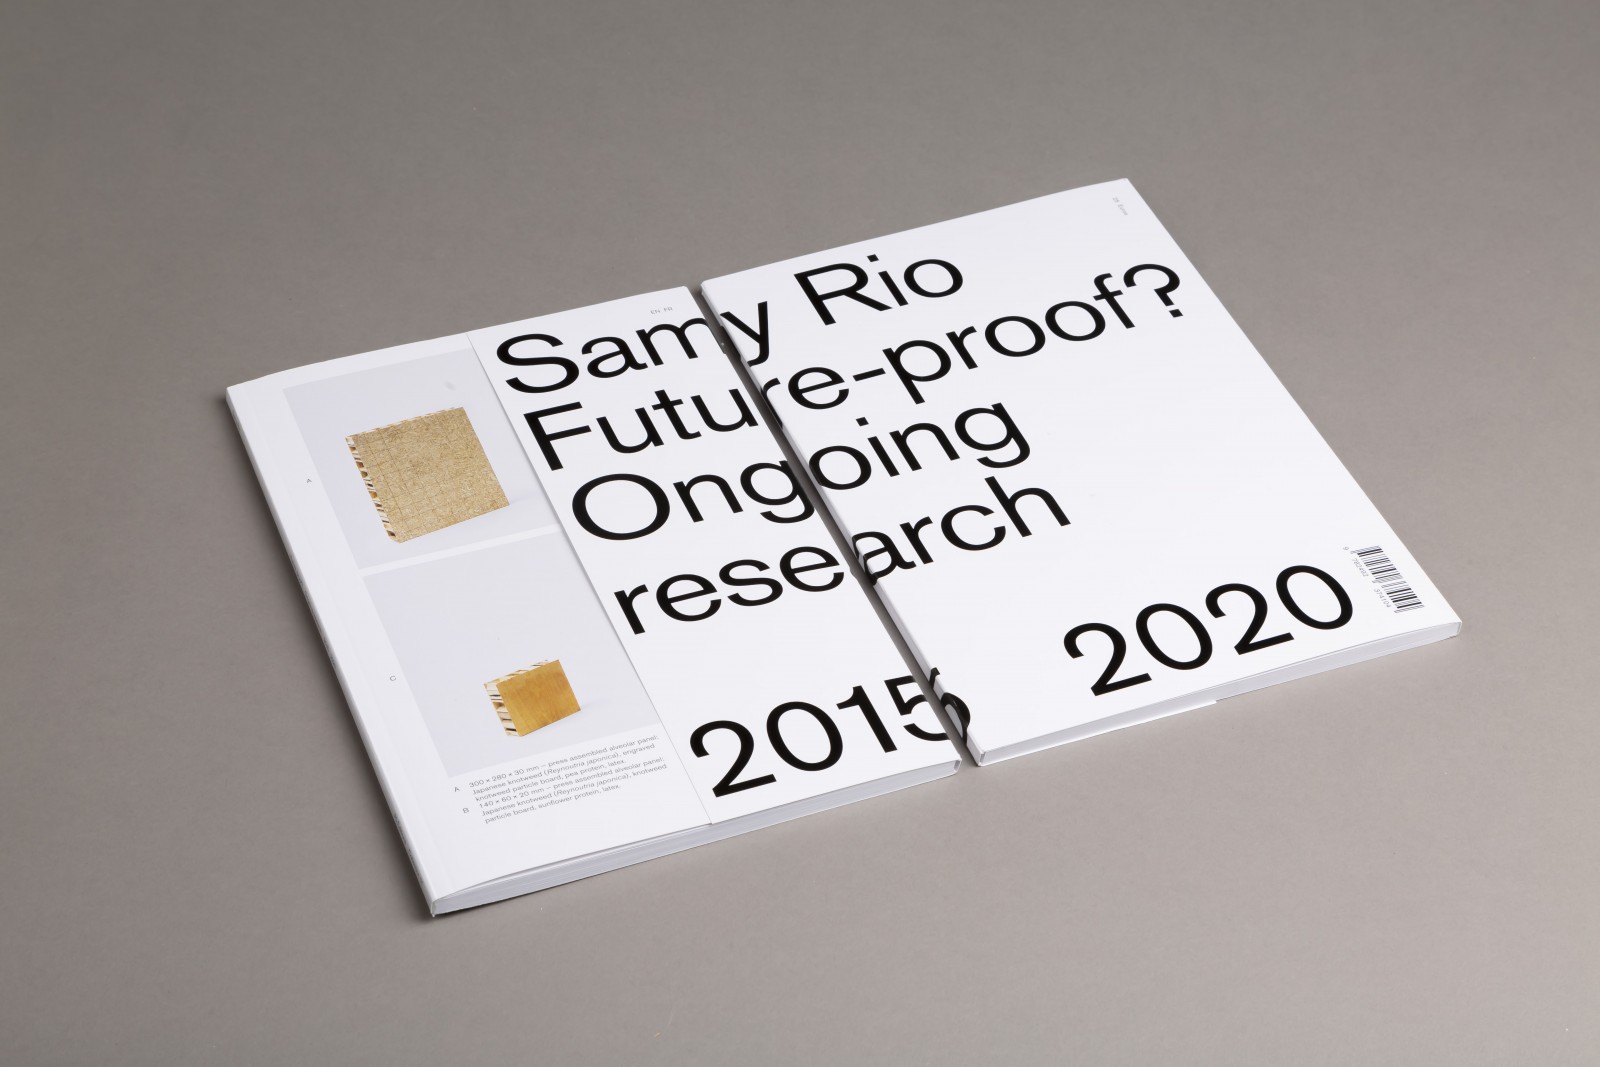 Collection 01 • Samy Rio, Future–proof ? Ongoing research (2015–2020)